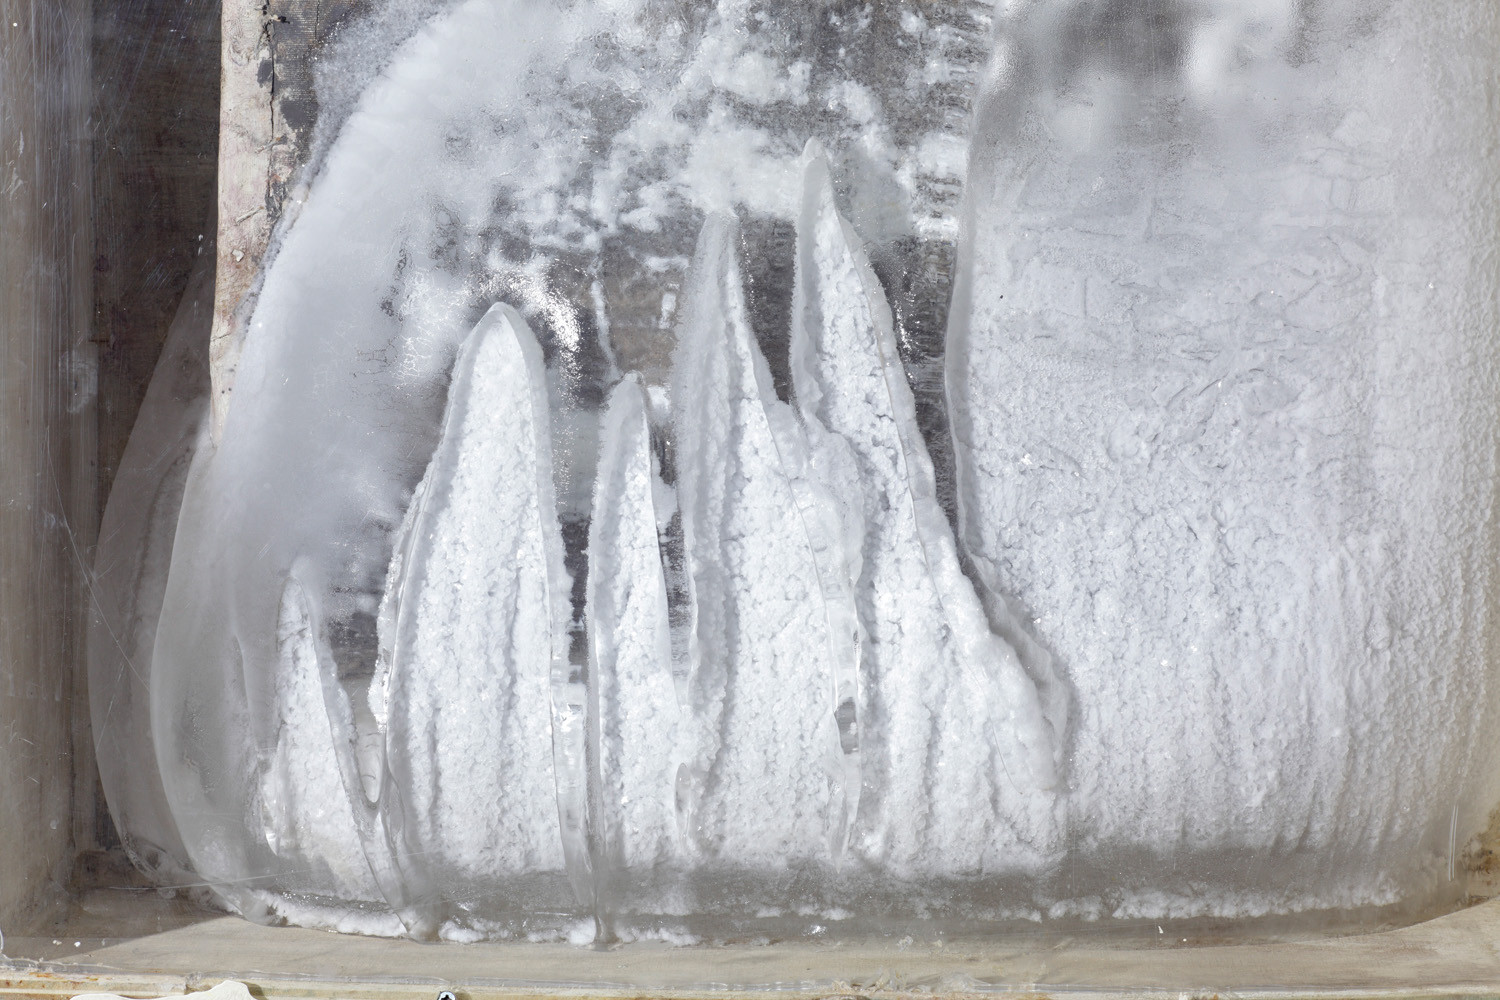 Lawrence Carroll, ‘Untitled (Freezing Painting), detail’, 2005, Oil, wax on canvas over wood, ice